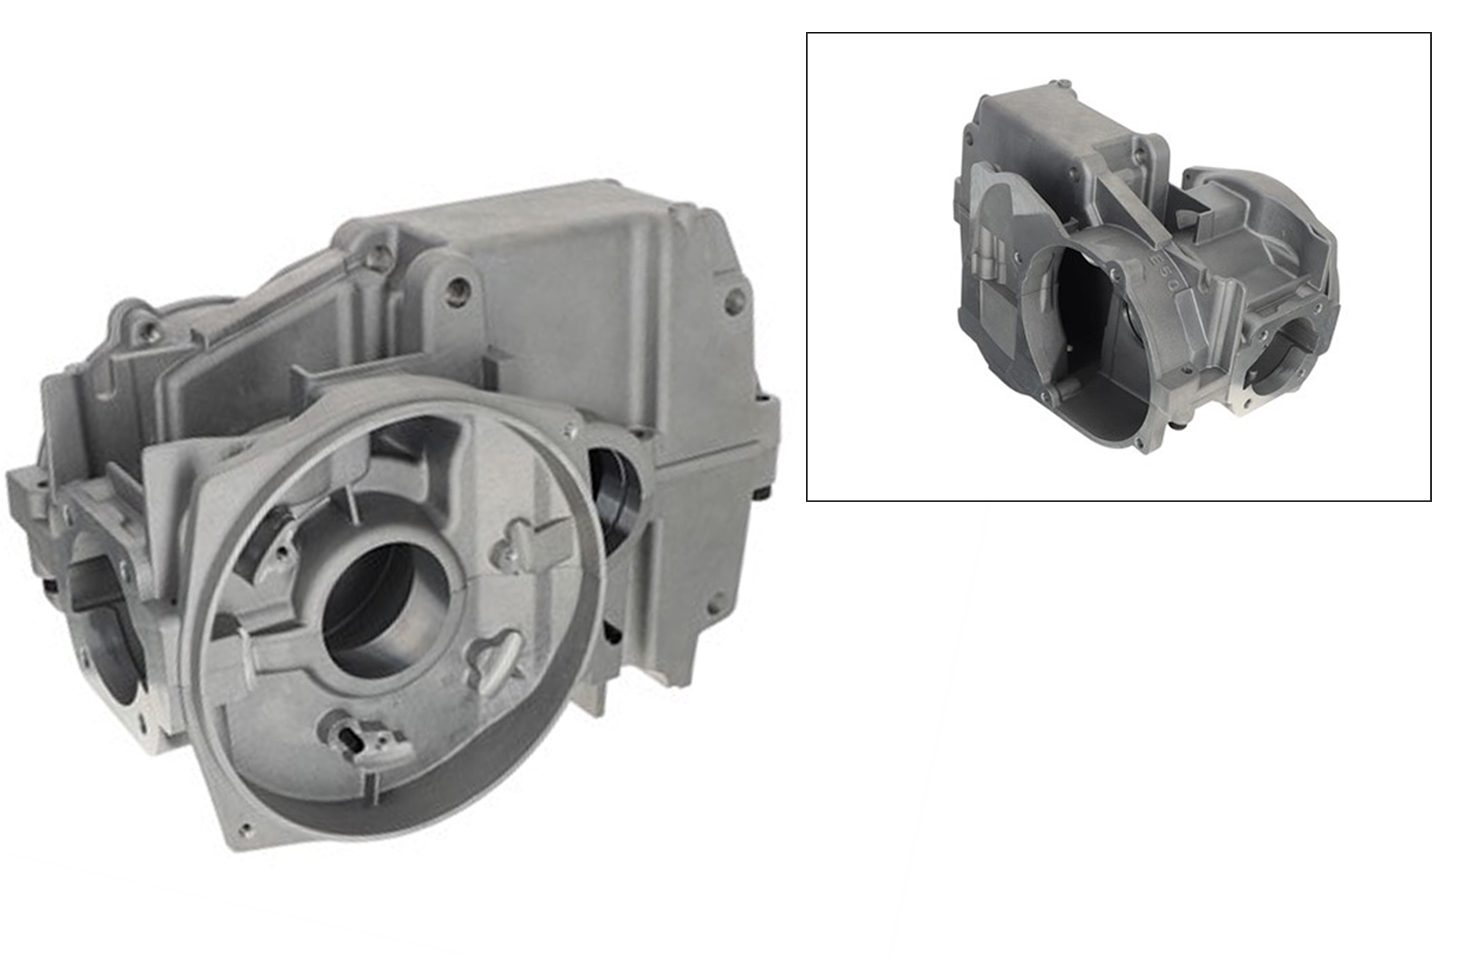 PUCH MAXI S / N MAGNUM X30 X40 Puch E50 crankcase housing 4 bearing as original 1:1 crankcase 349.3.10.332.0 engine housing - All original parts such as gearbox, crankshaft, ignition plate etc. can be used, the dimensions are 1:1 the same as the original.